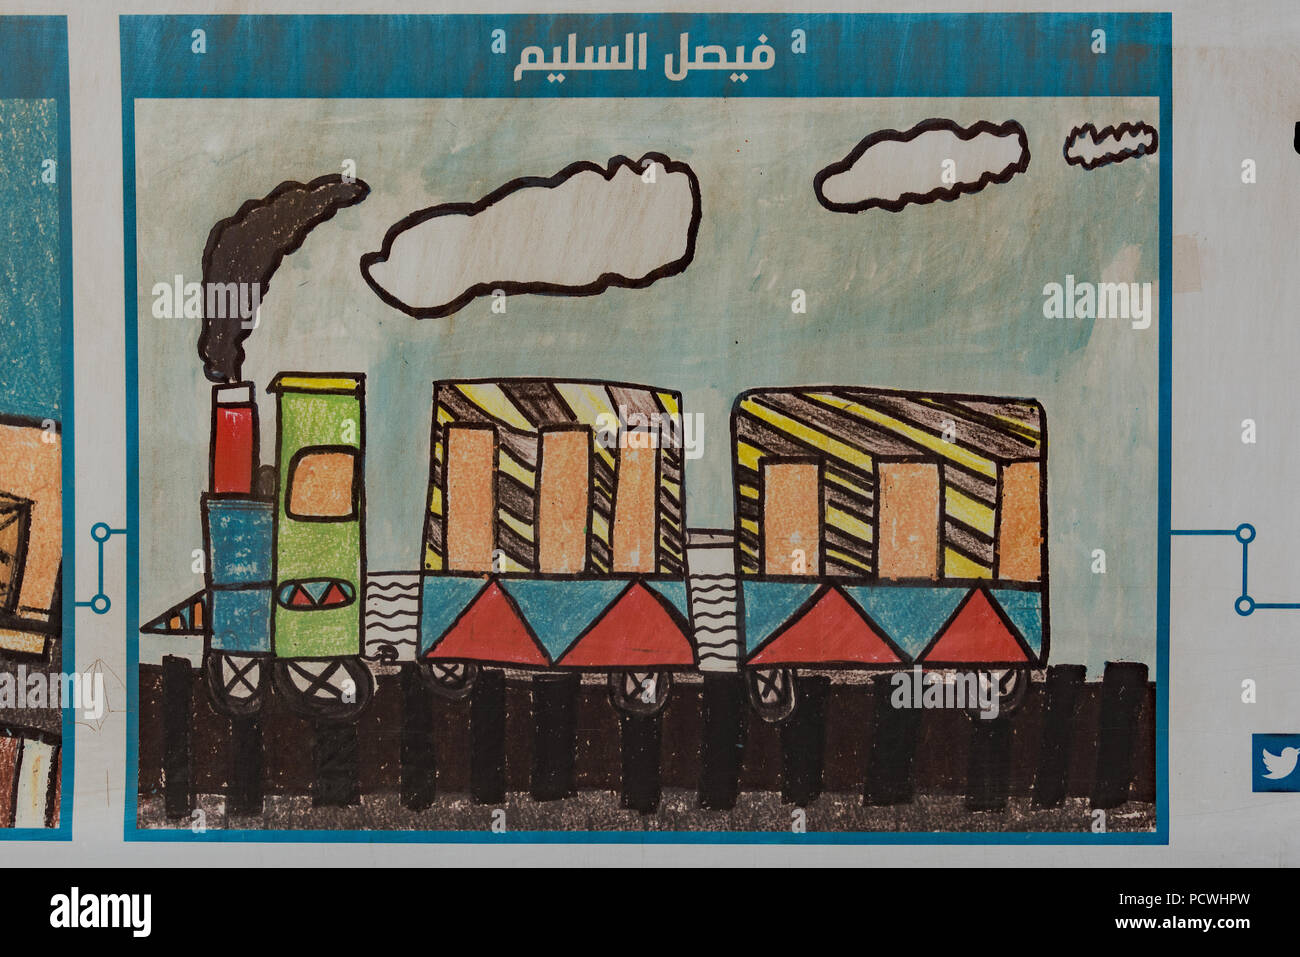 Posters of children's artwork of the new Riyadh public rapid transit system. Posters can be seen at the constructions sites around Riyadh. Stock Photo